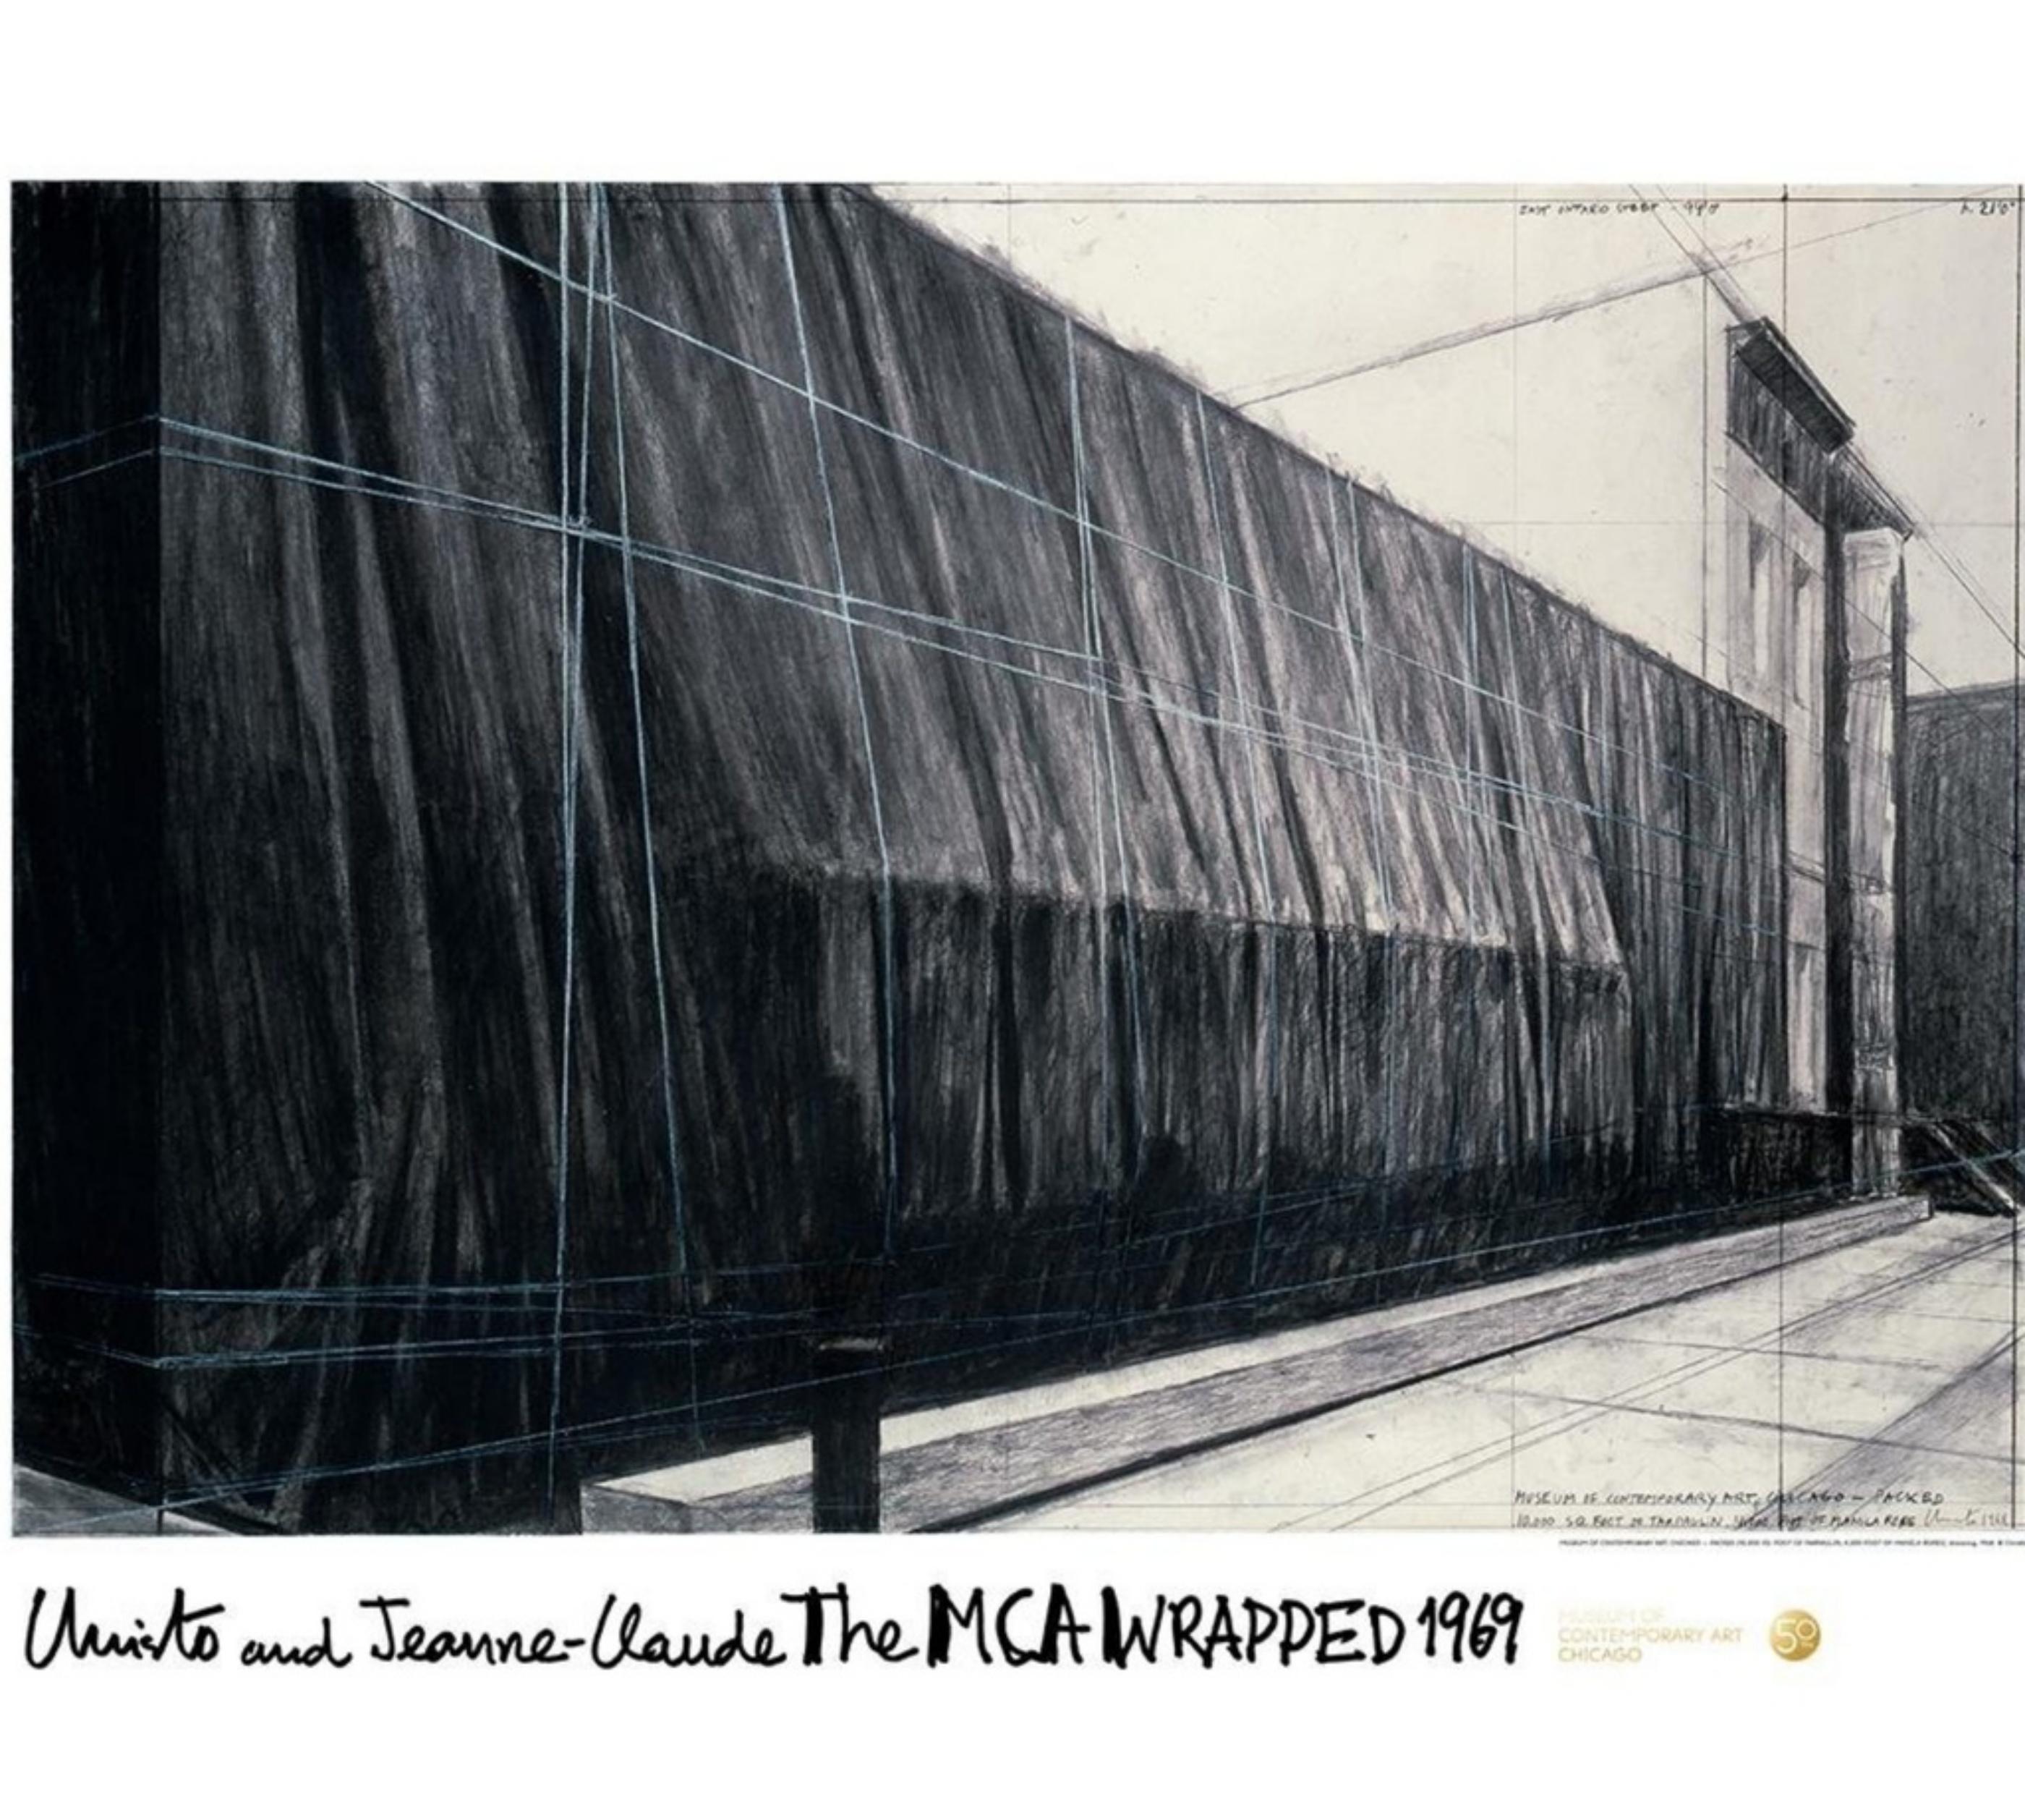 Christo Figurative Print - The MCA Wrapped, 1969 (Limited Edition of 300)